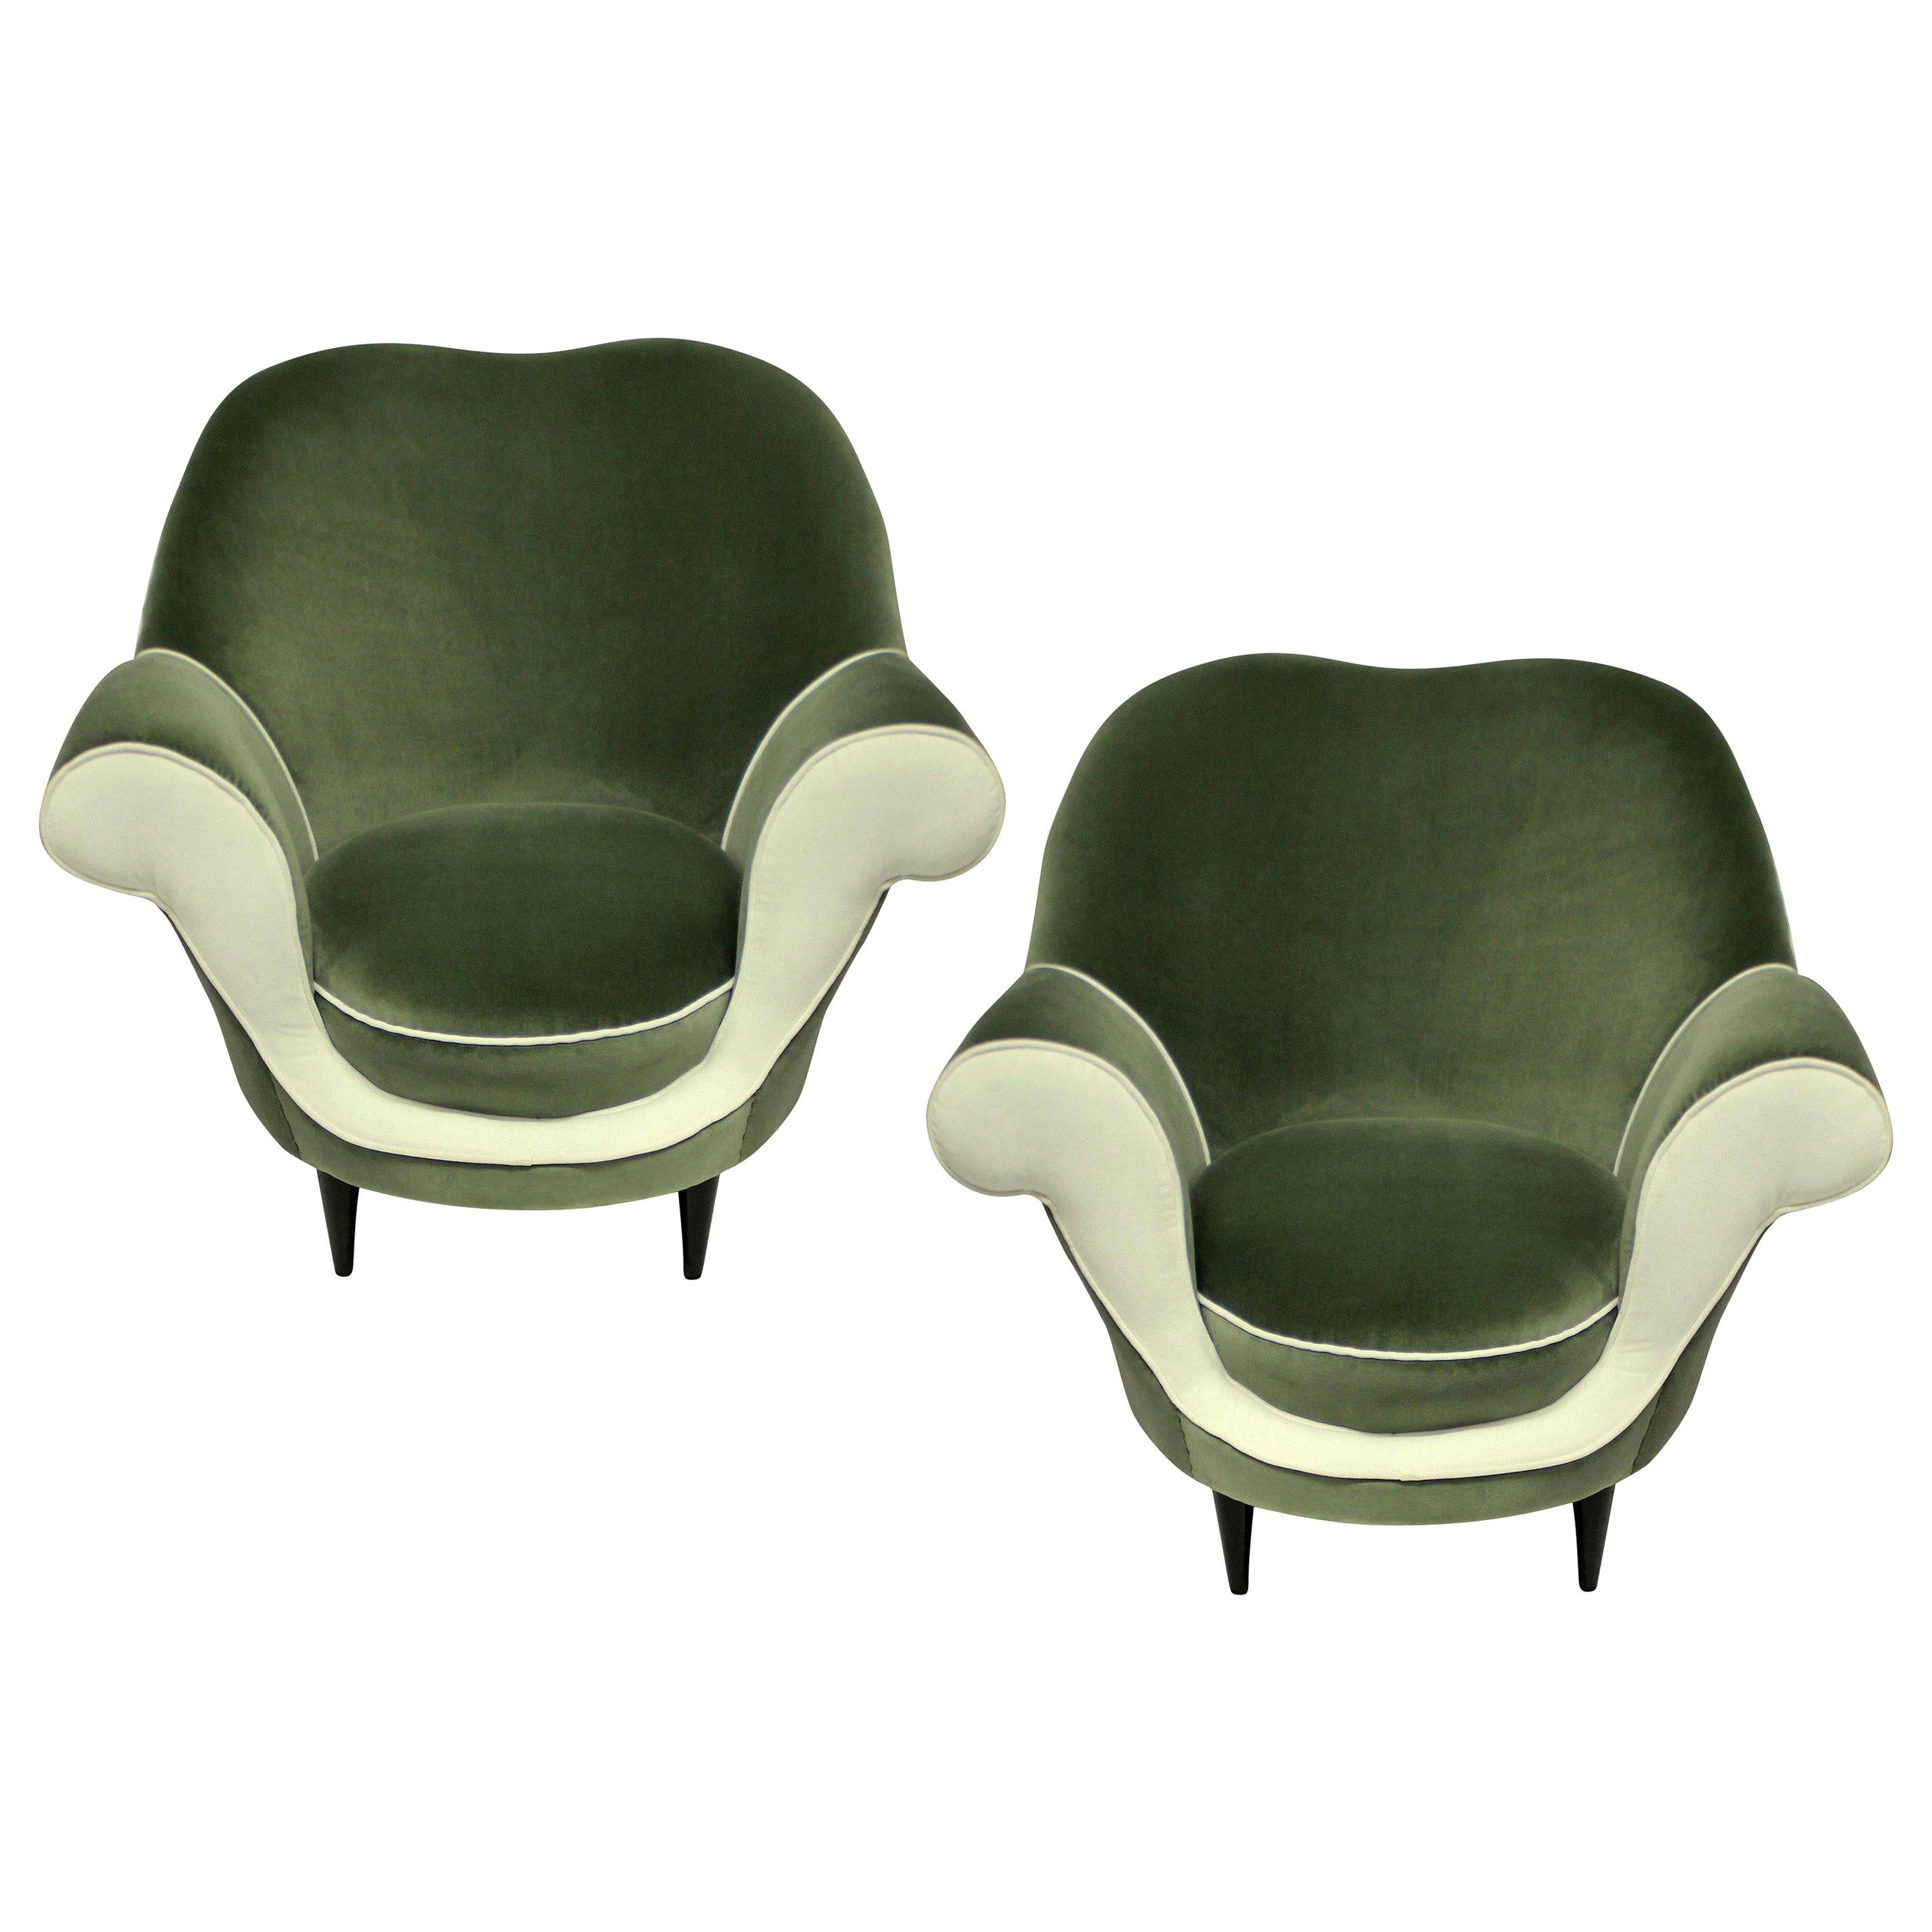 Pair of Sculptural Armchairs by Ico Parisi